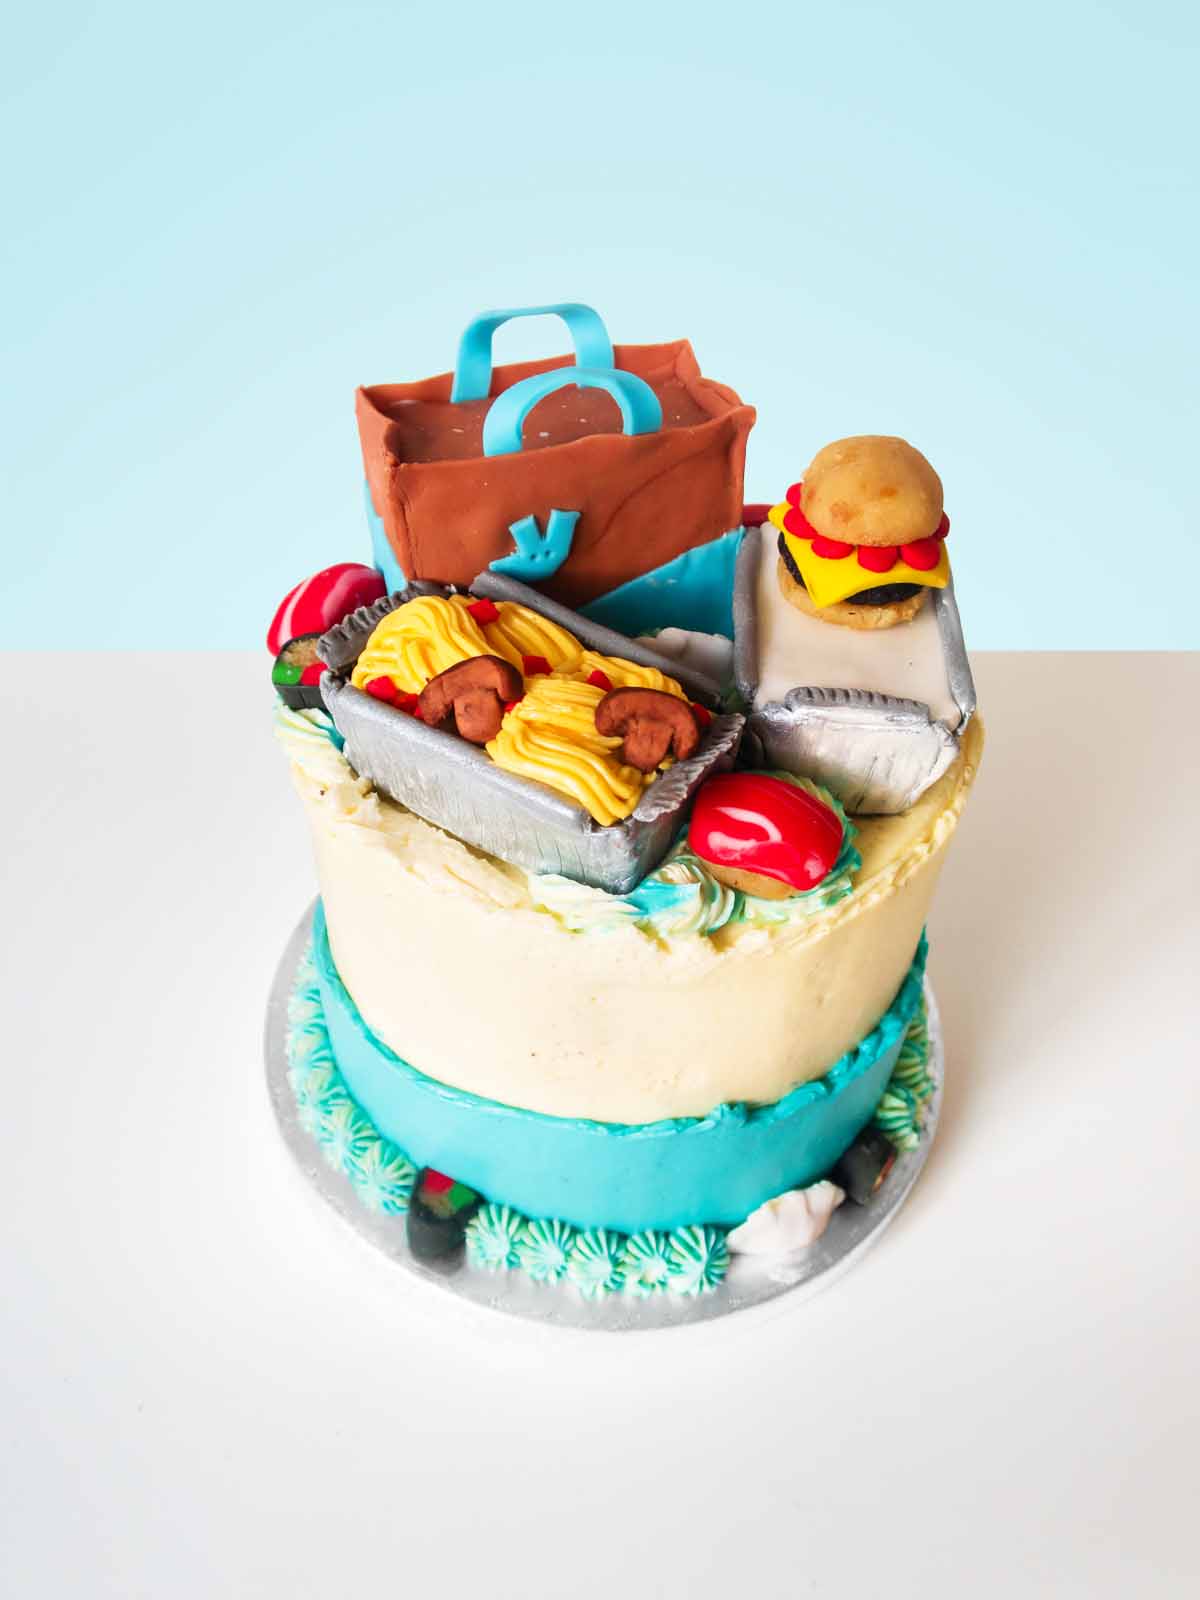 Take Away Deliveroo Cake Delivery London